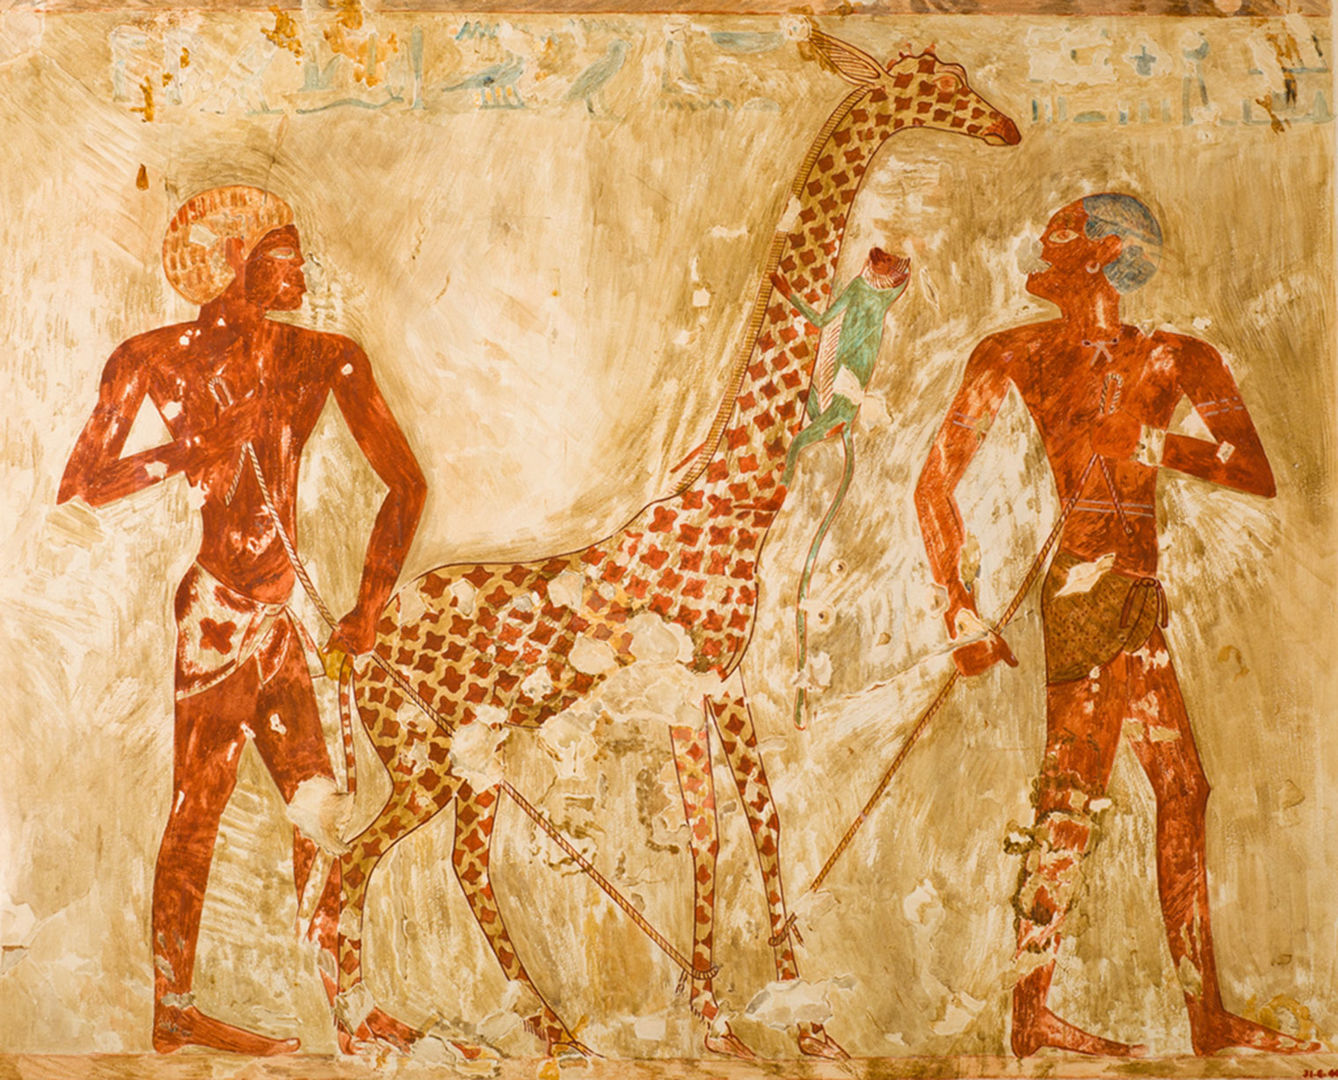 A facsimile painting depicting Nubians with a Giraffe and a Monkey found in Tomb of Rekhmire